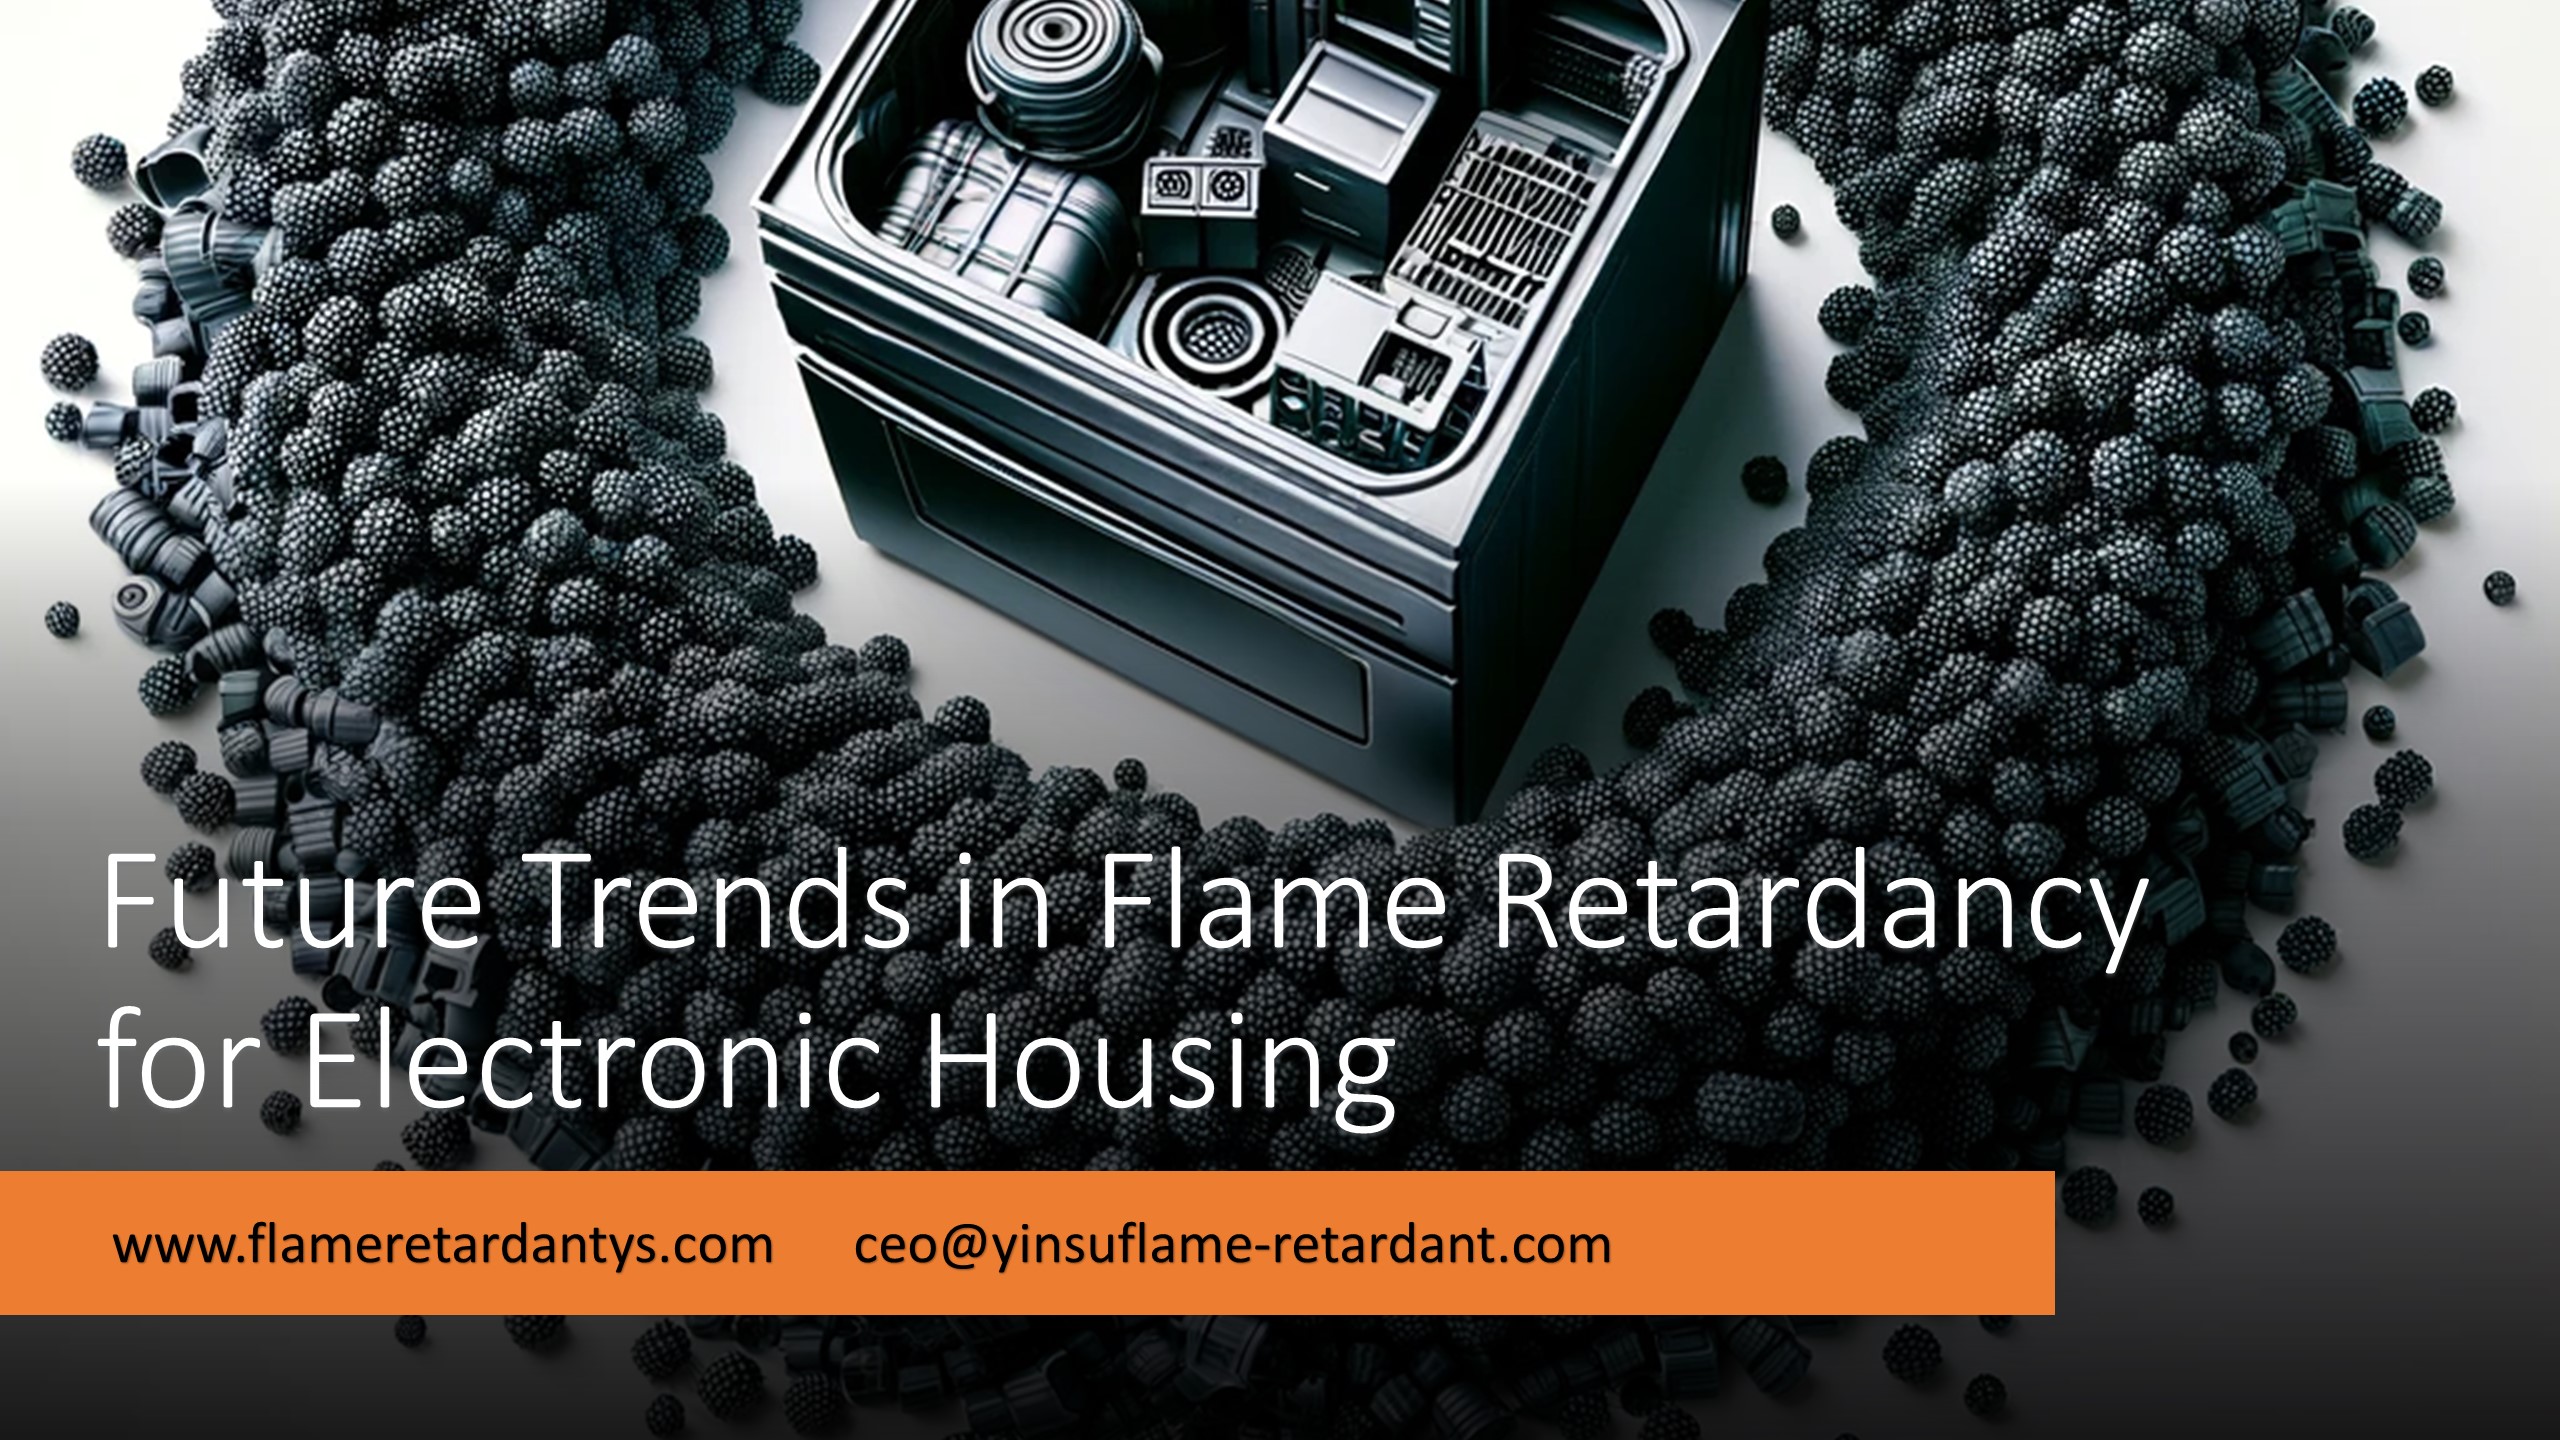 7.3 Future Trends in Flame Retardancy for Electronic Housing